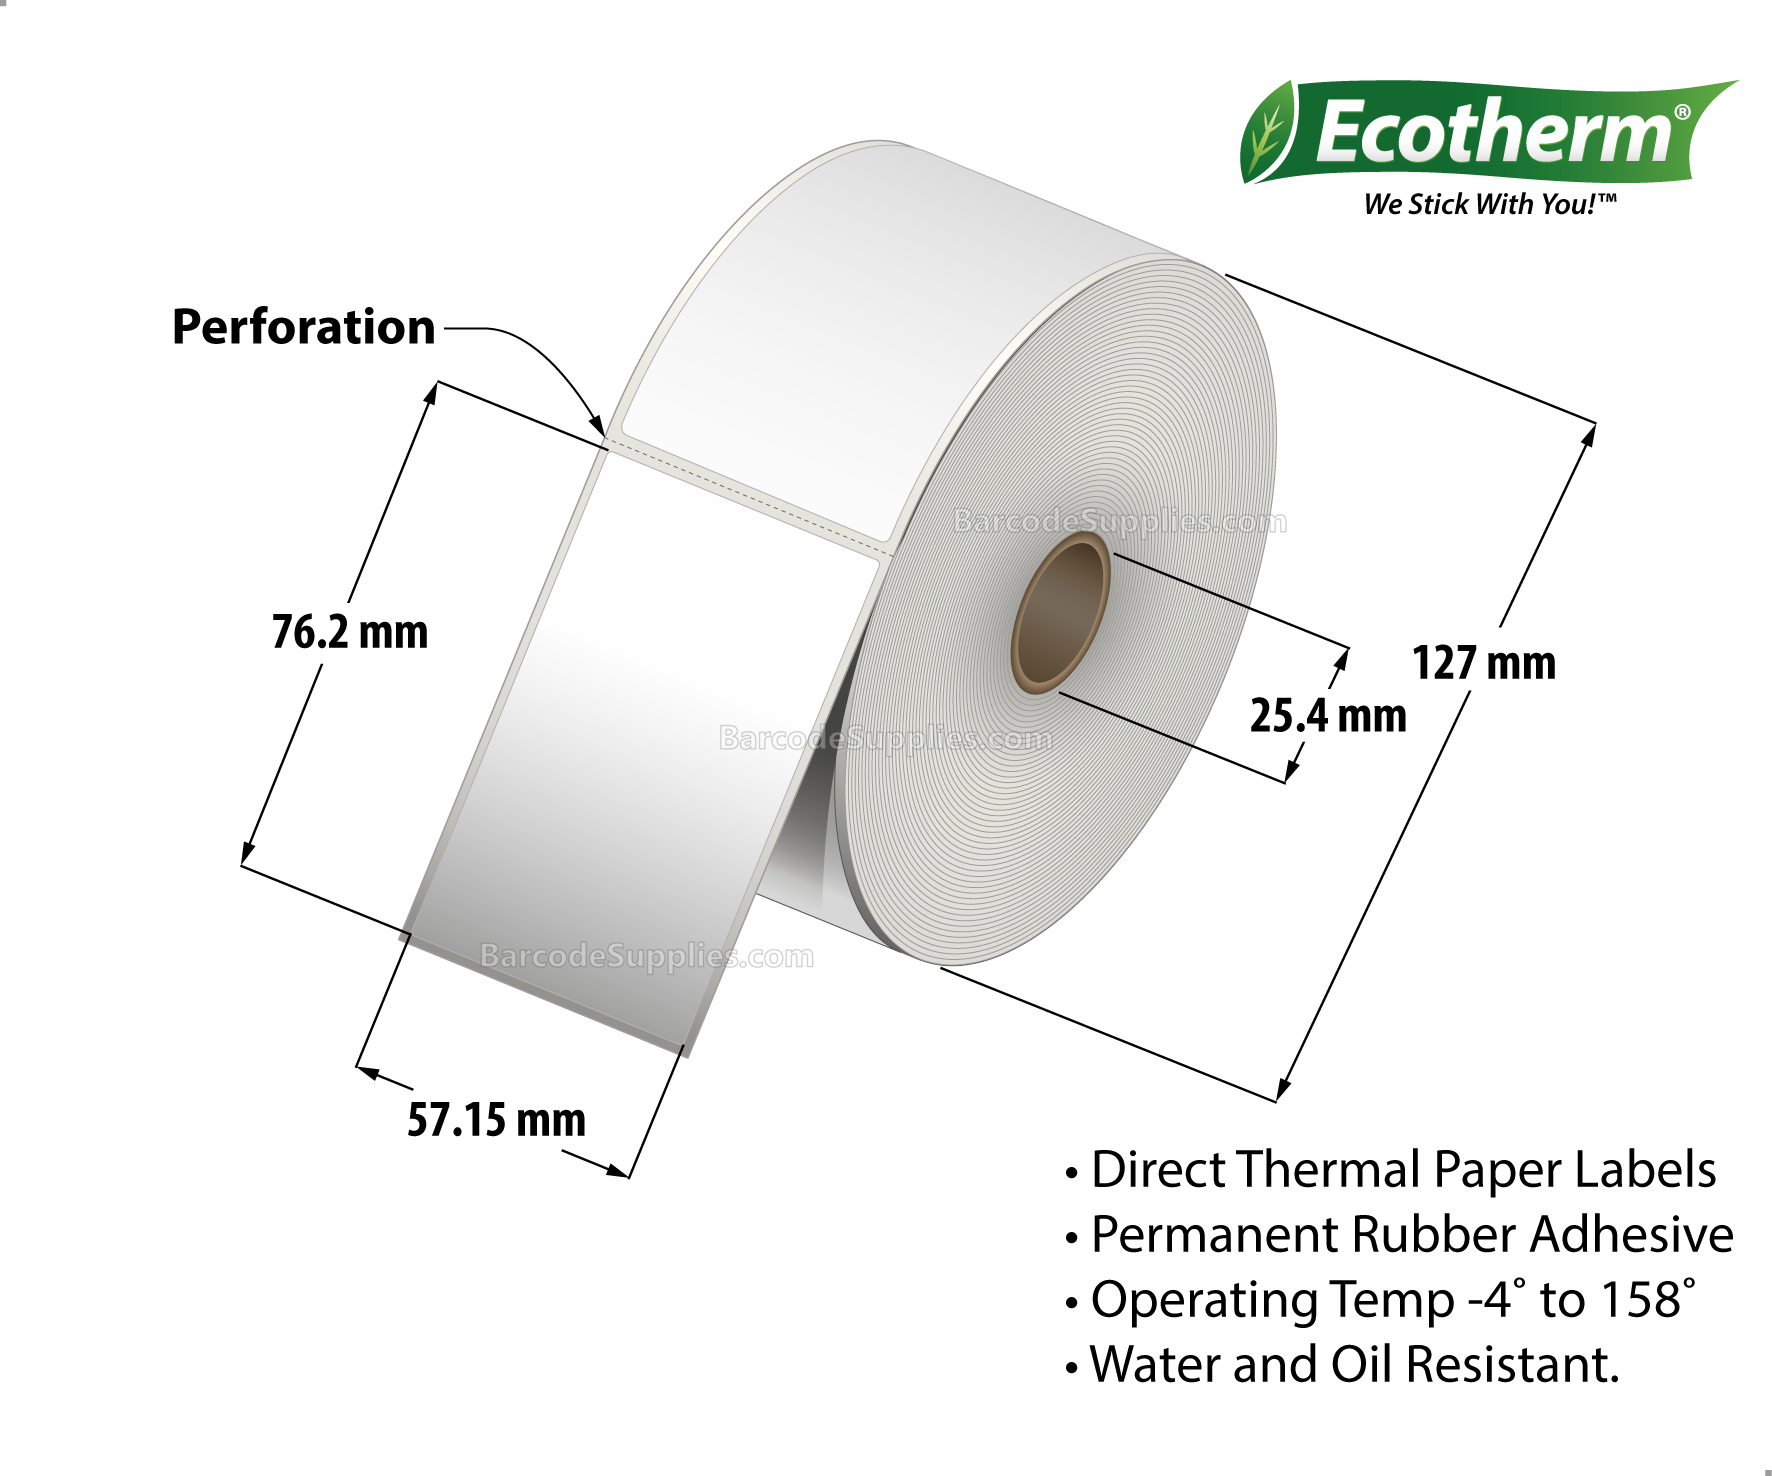 2.25 x 4 Direct Thermal White Labels With Rubber Adhesive - Perforated - 700 Labels Per Roll - Carton Of 6 Rolls - 4200 Labels Total - MPN: ECOTHERM15132-6